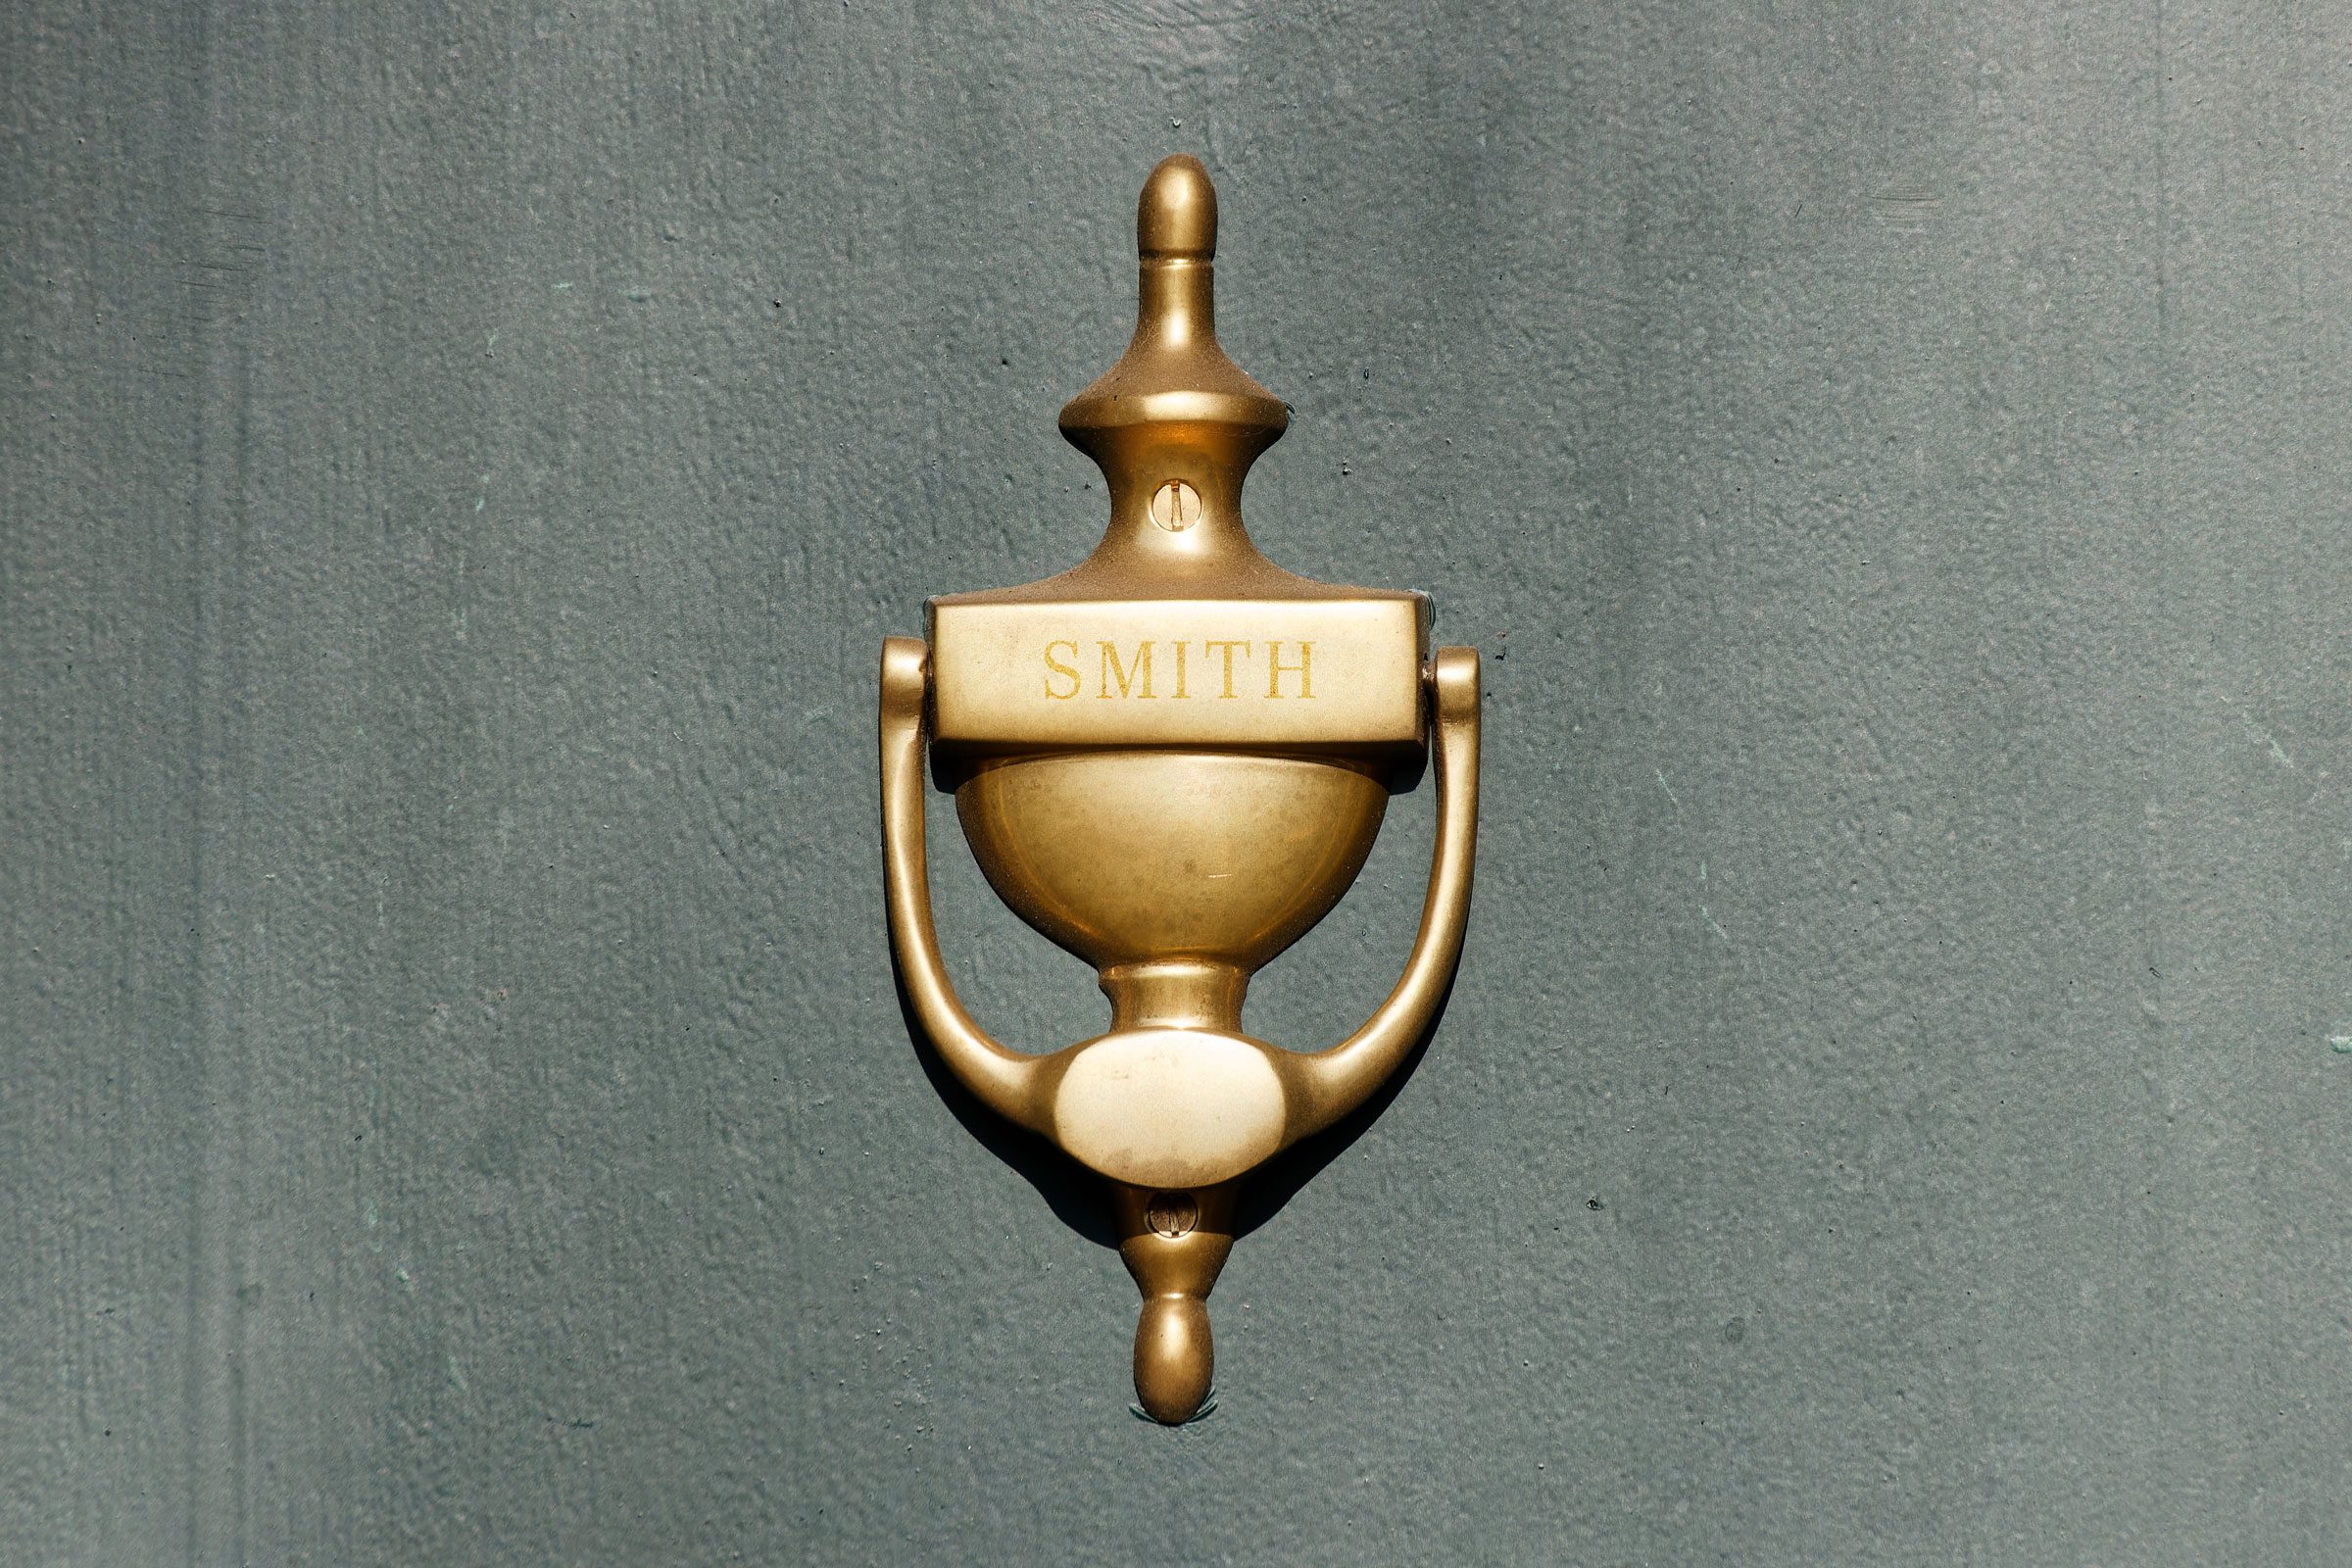 door knocker with "smith" engraved onto it